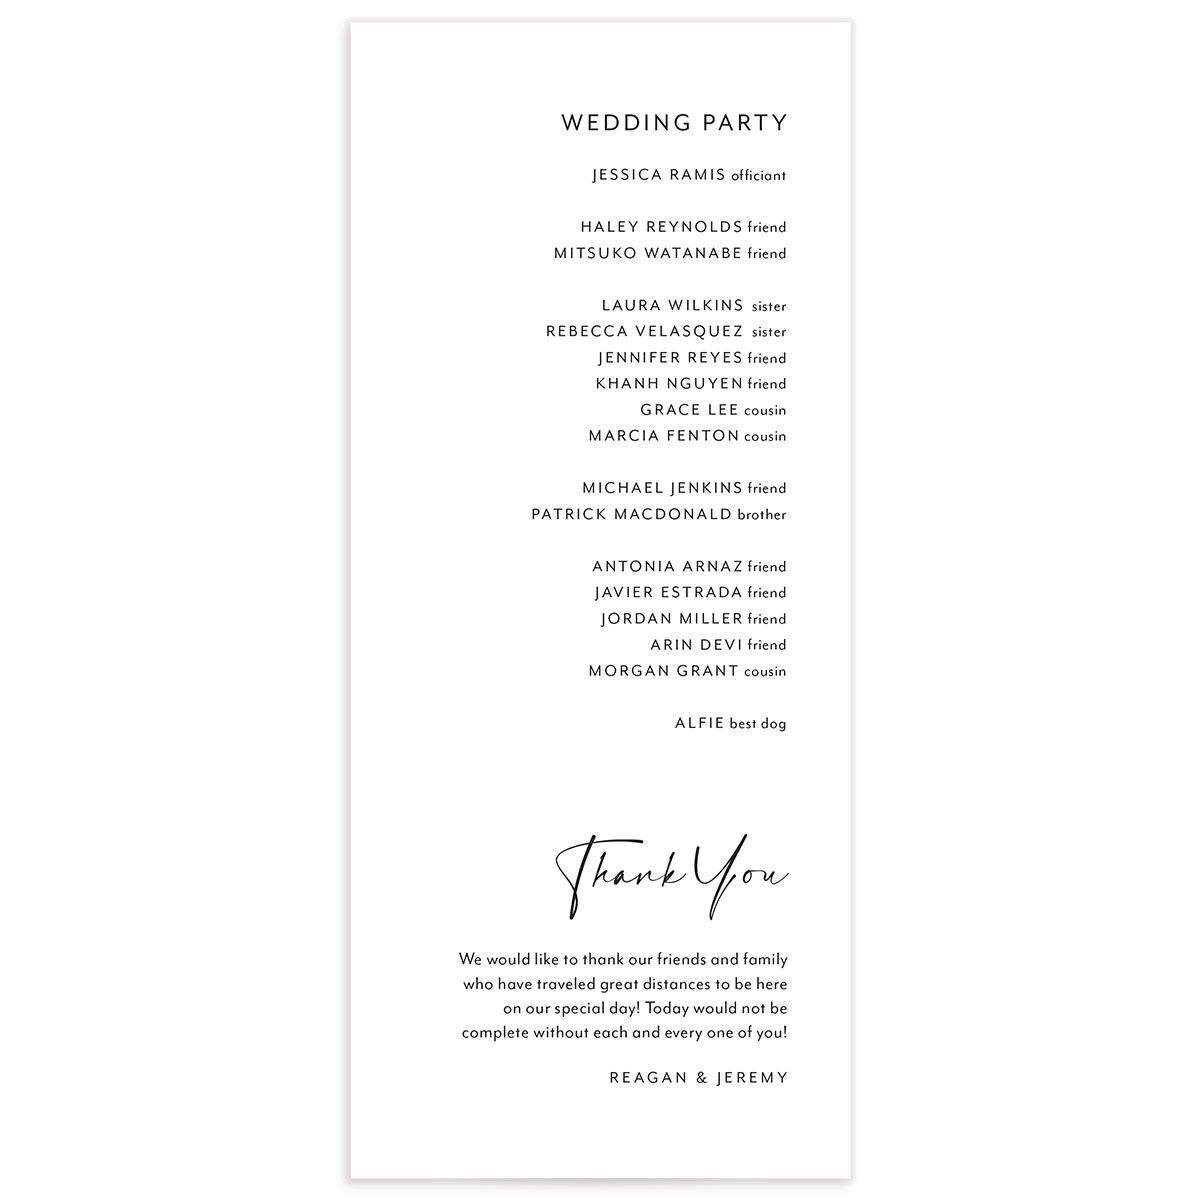 Signature Style Wedding Programs back in Pure White